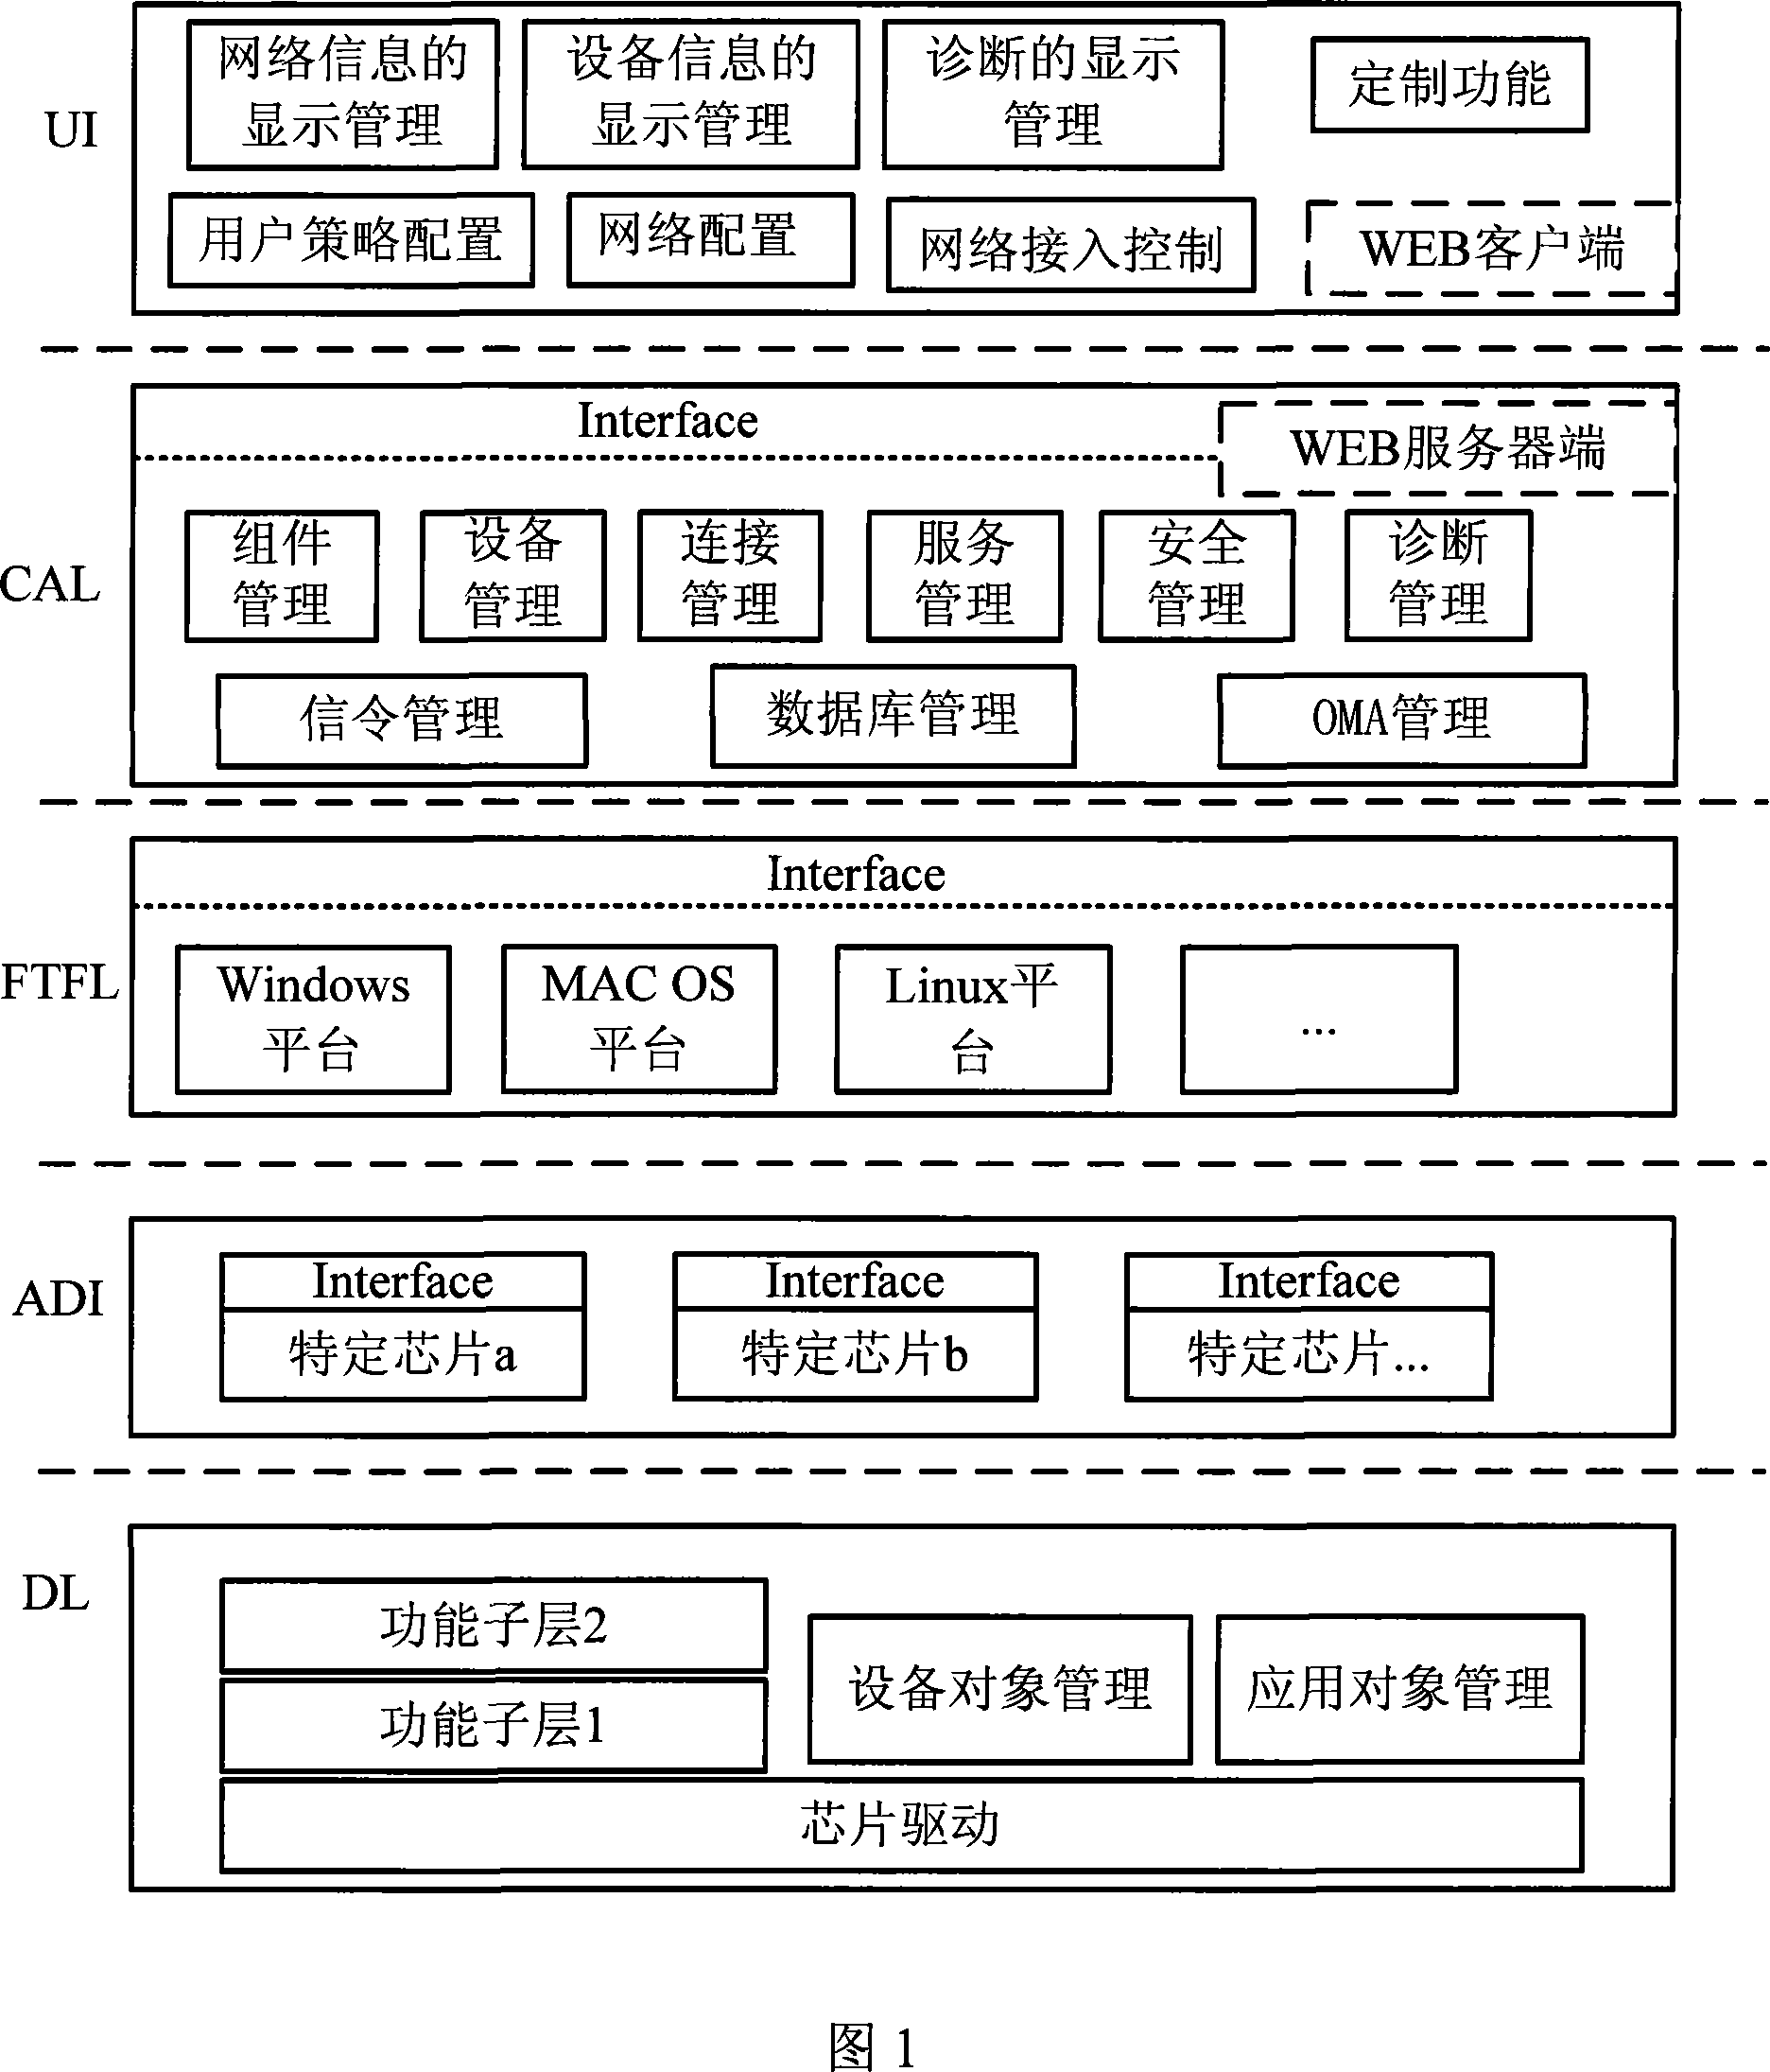 System for developing mobile communications terminal equipment